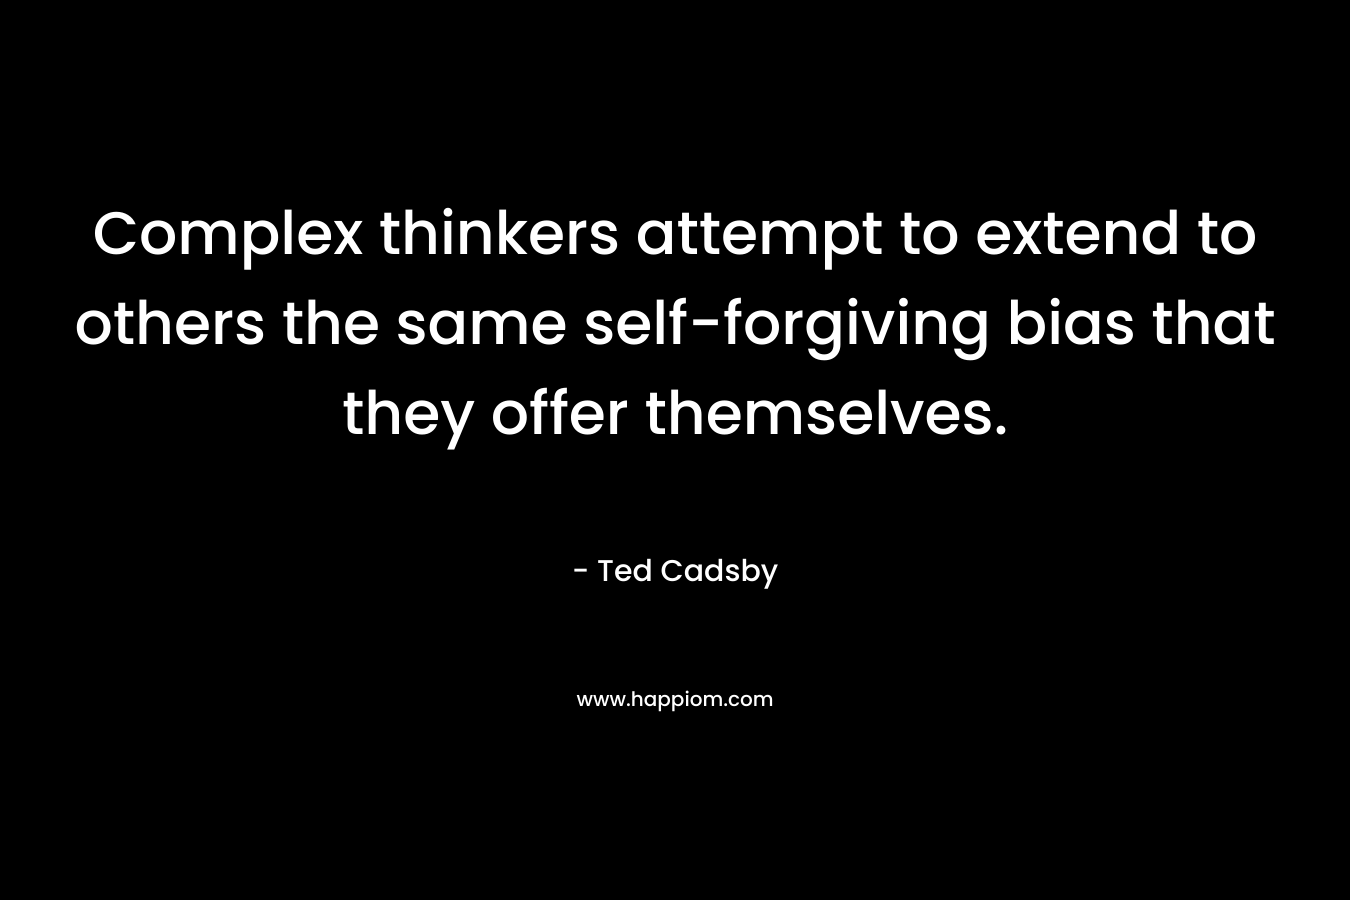 Complex thinkers attempt to extend to others the same self-forgiving bias that they offer themselves.